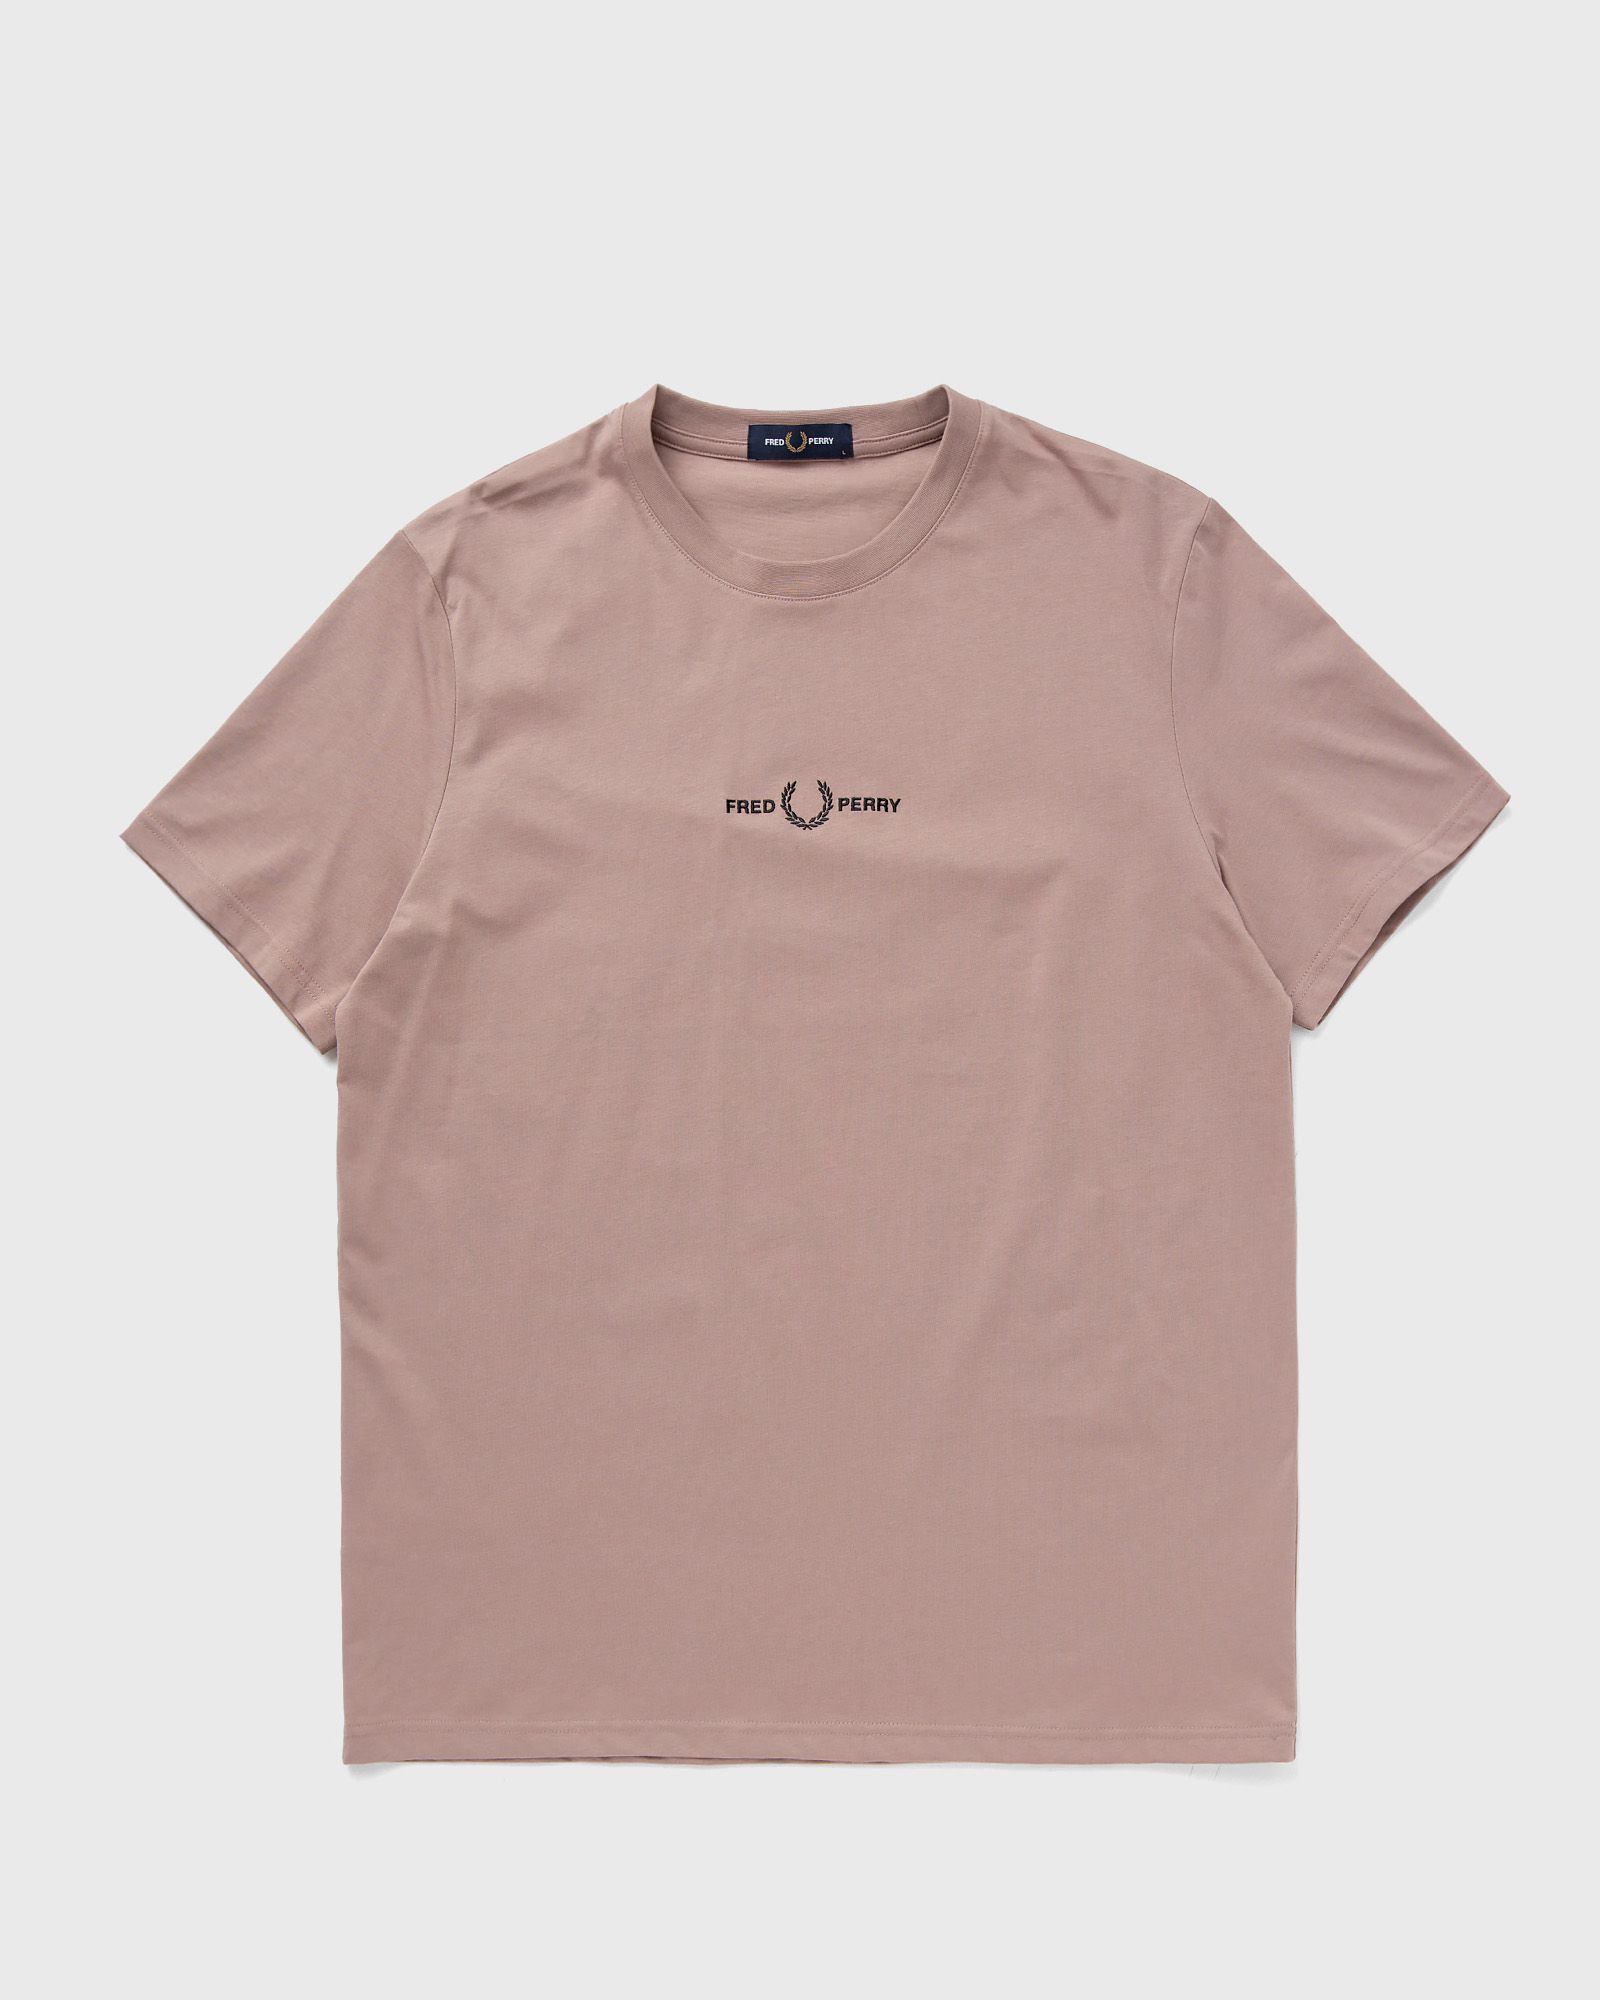 Fred Perry - embroidered t-shirt men shortsleeves pink in größe:l